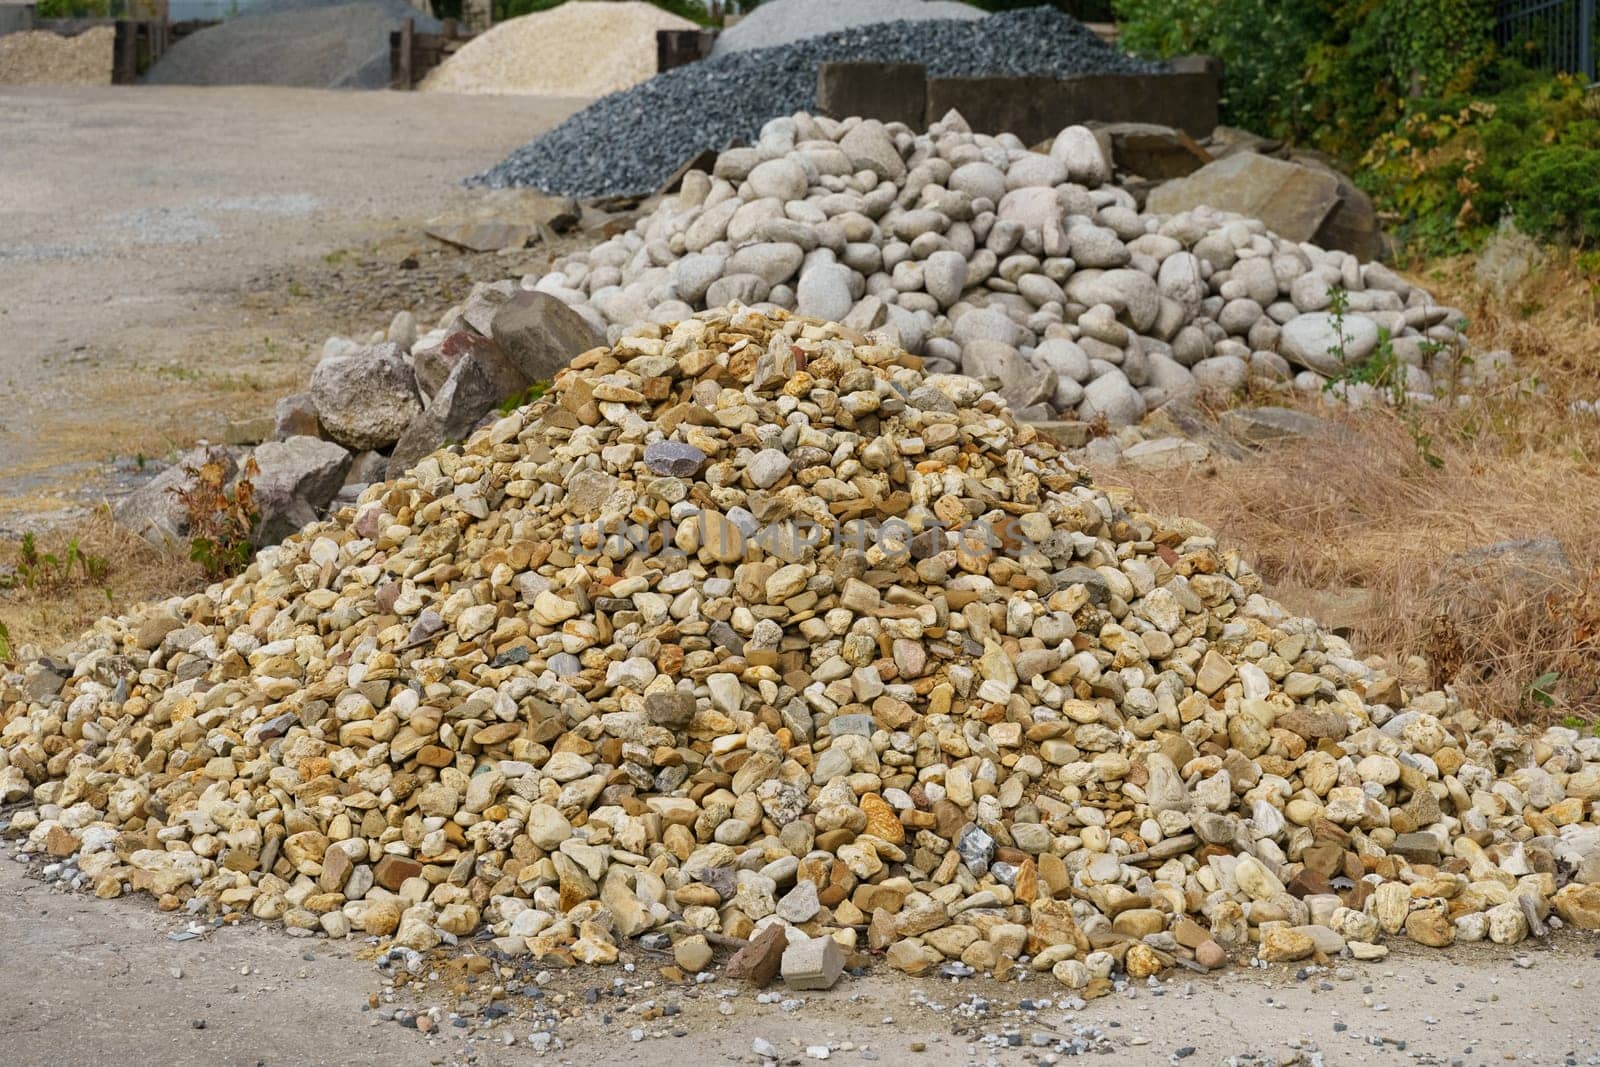 A cluster of rocks piled neatly at the edge of a road, likely placed for construction or landscaping purposes, under a clear blue sky.